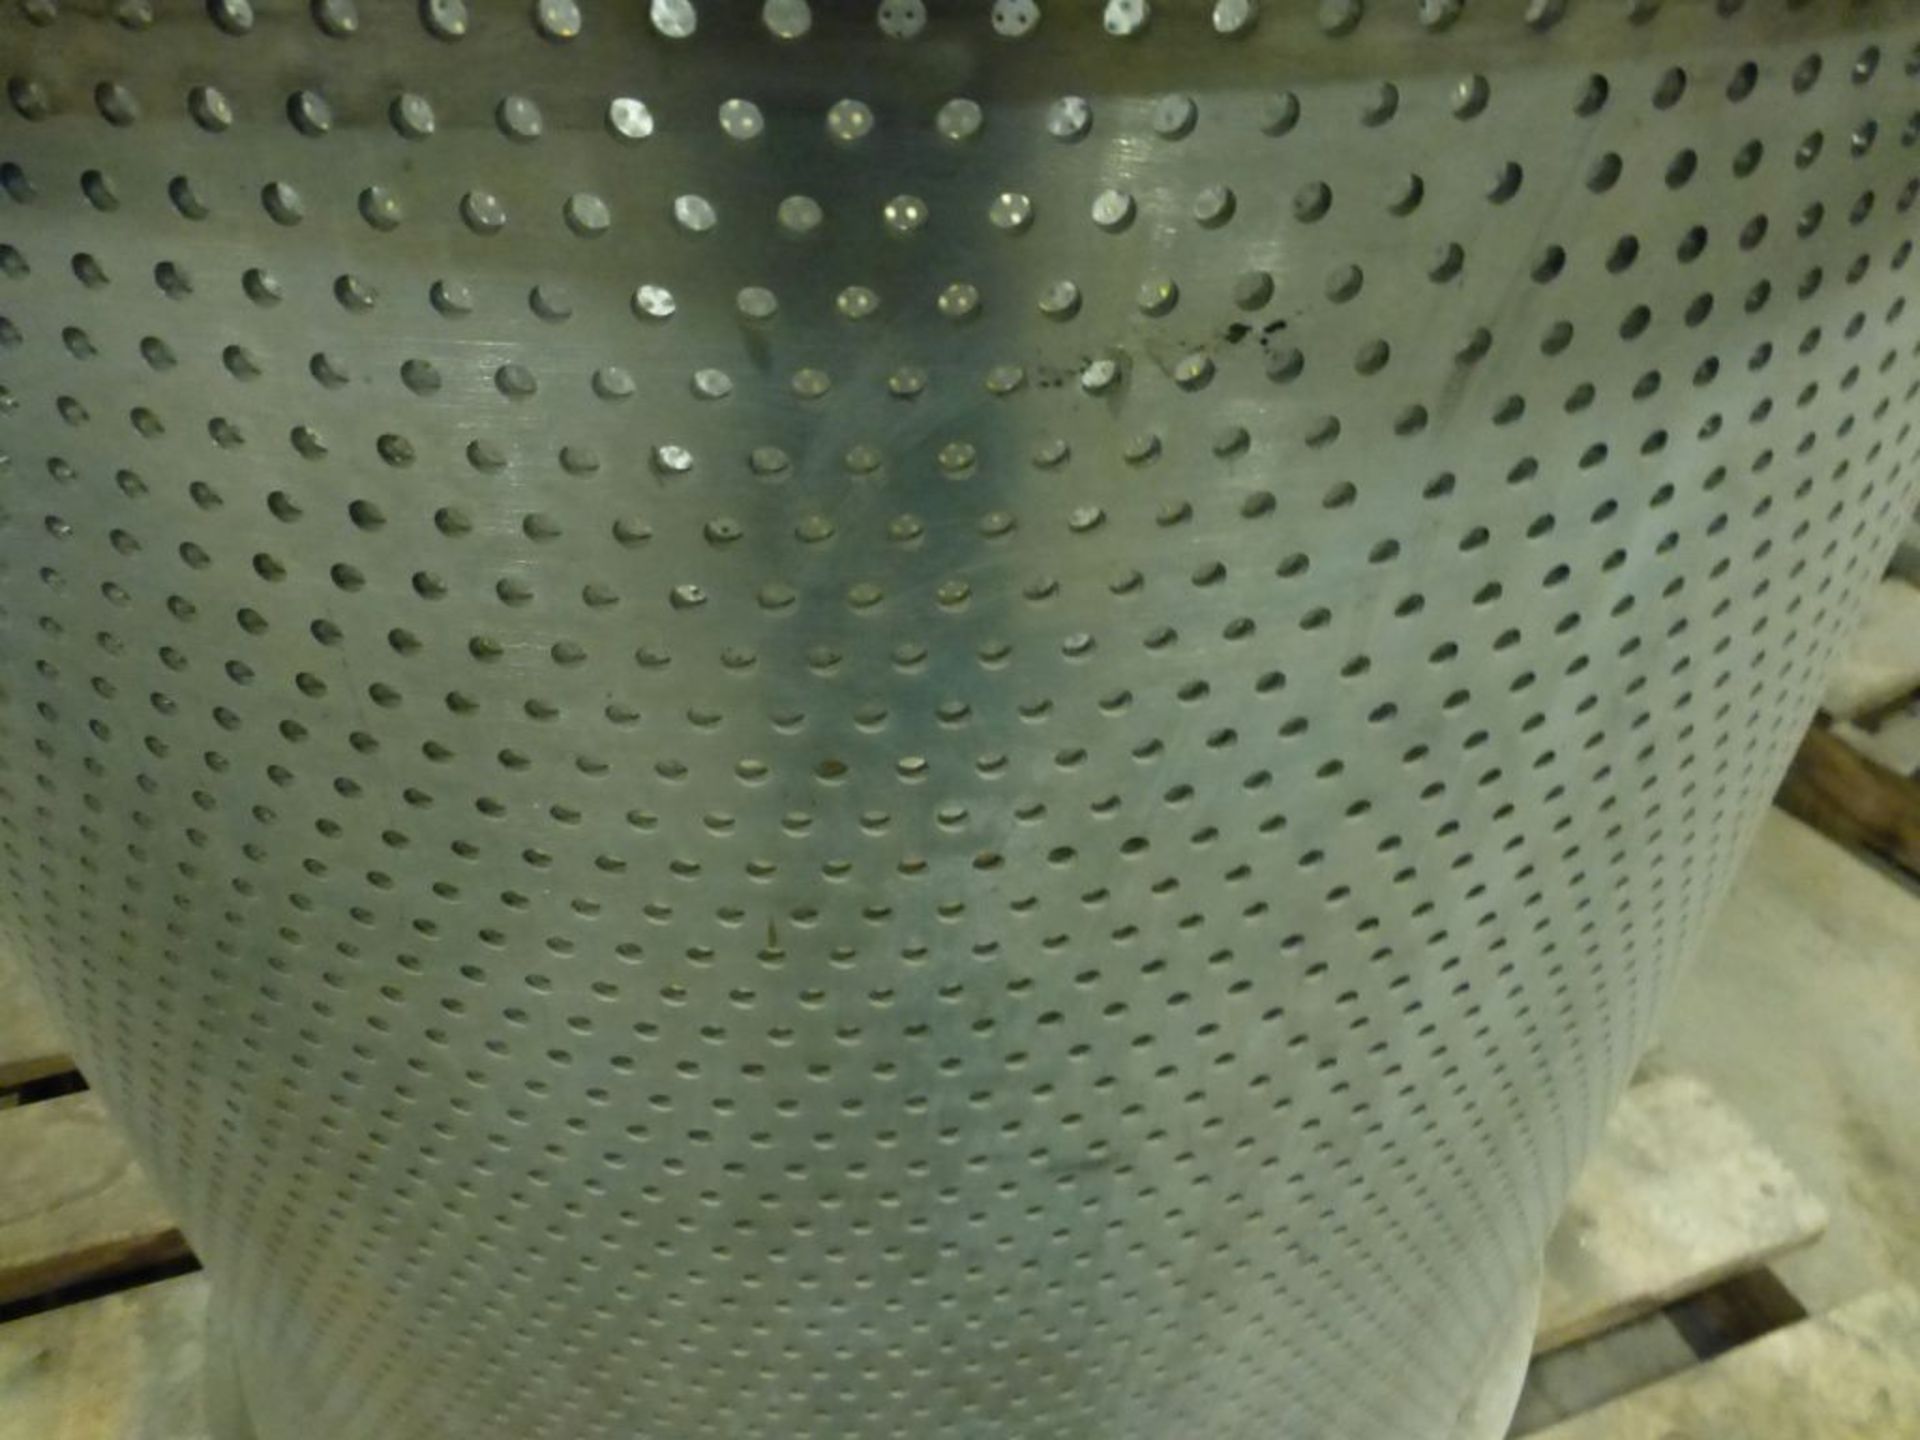 Stainless Steel Perforated Screen Basket | For Bird Model 15 Axiguard Screen w/.25 Diameter Holes - Image 3 of 4